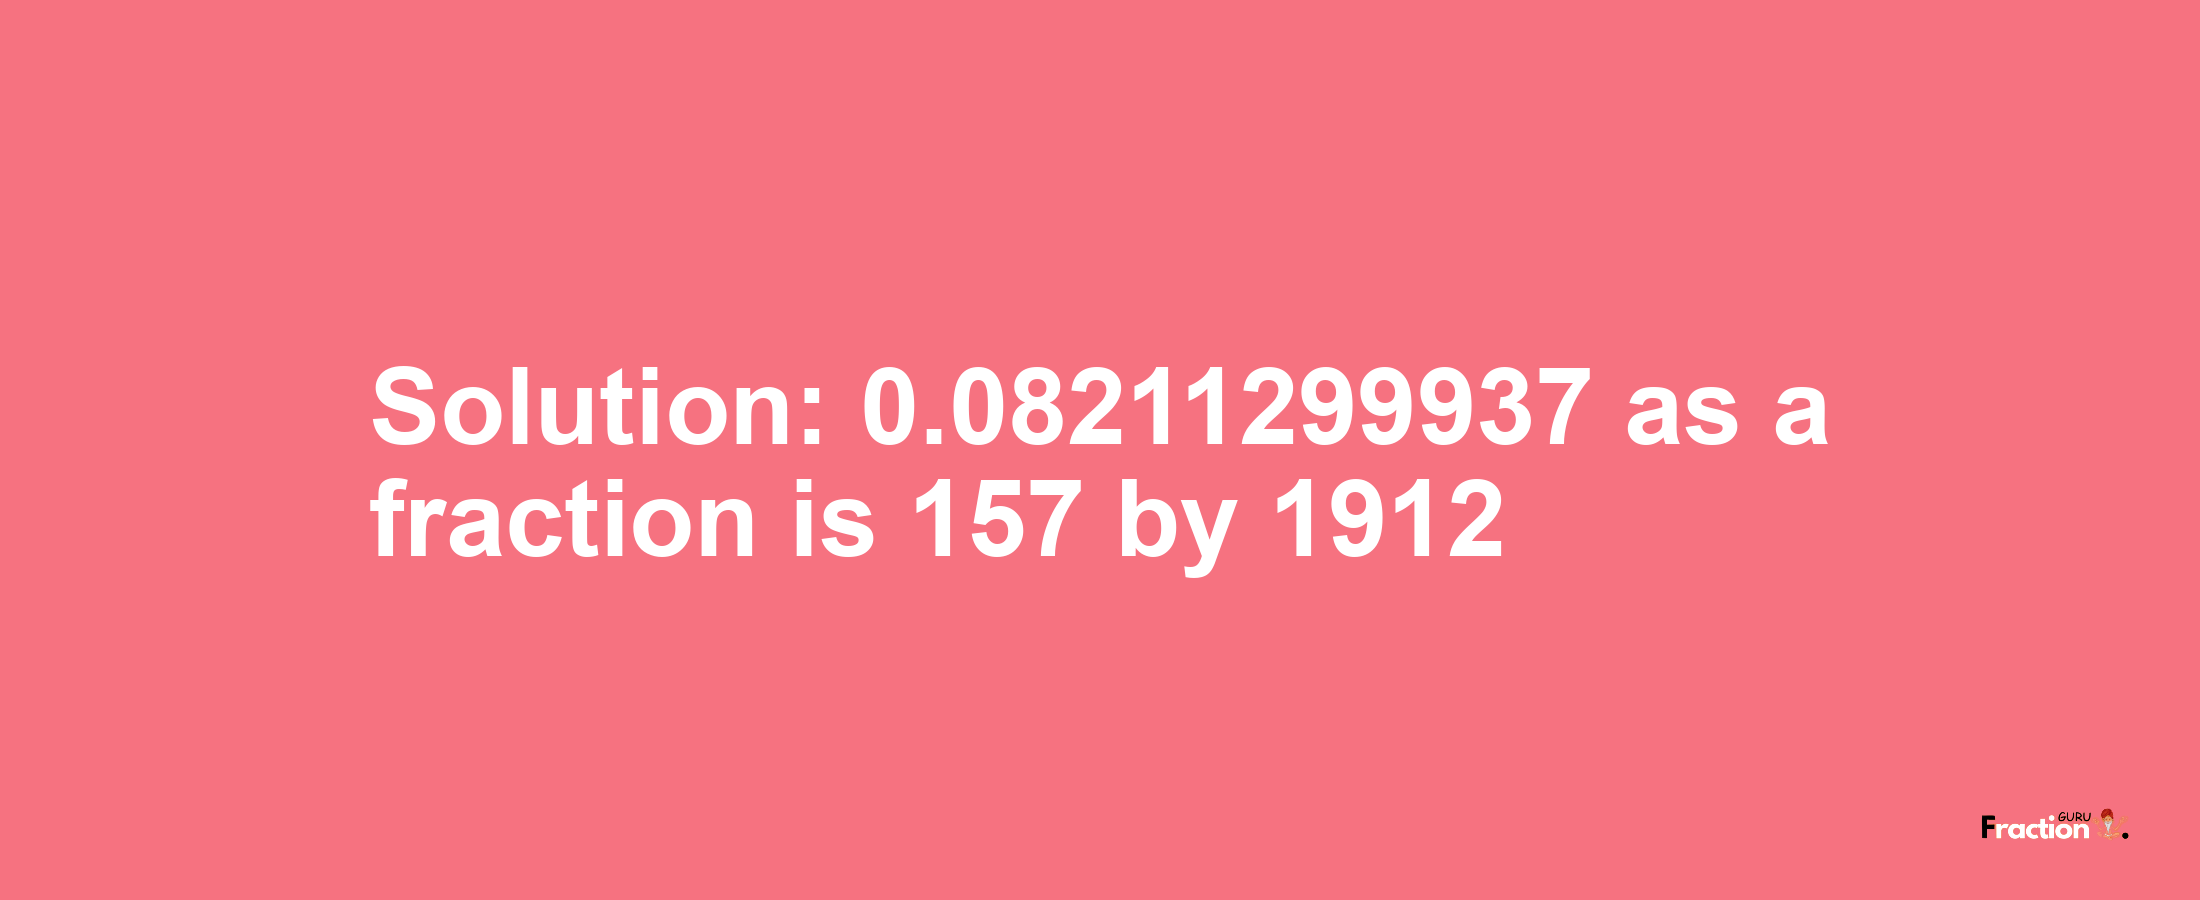 Solution:0.08211299937 as a fraction is 157/1912